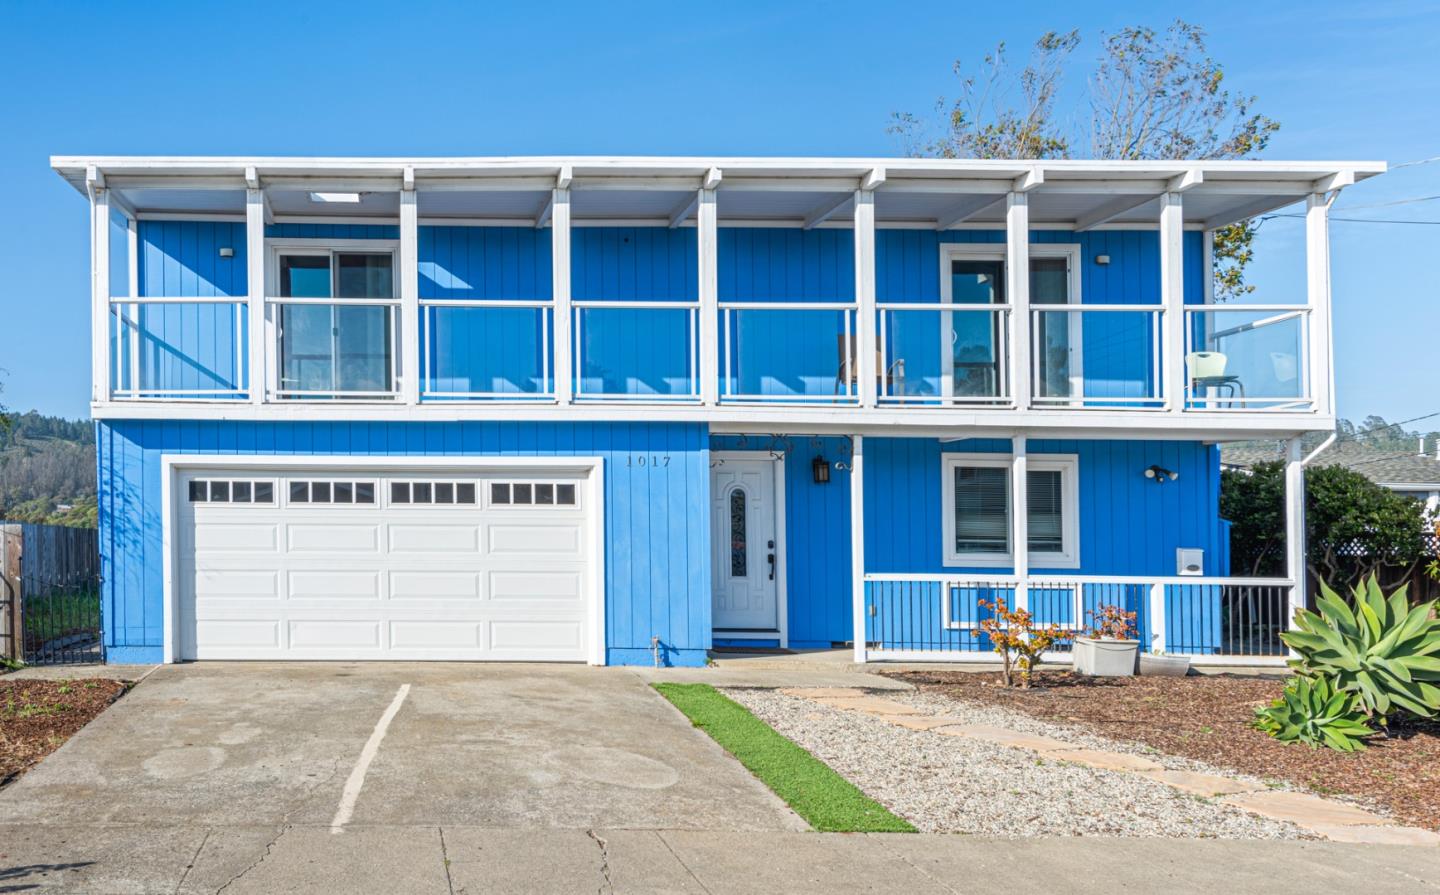 Photo of 1017 Dwight Ave in Half Moon Bay, CA